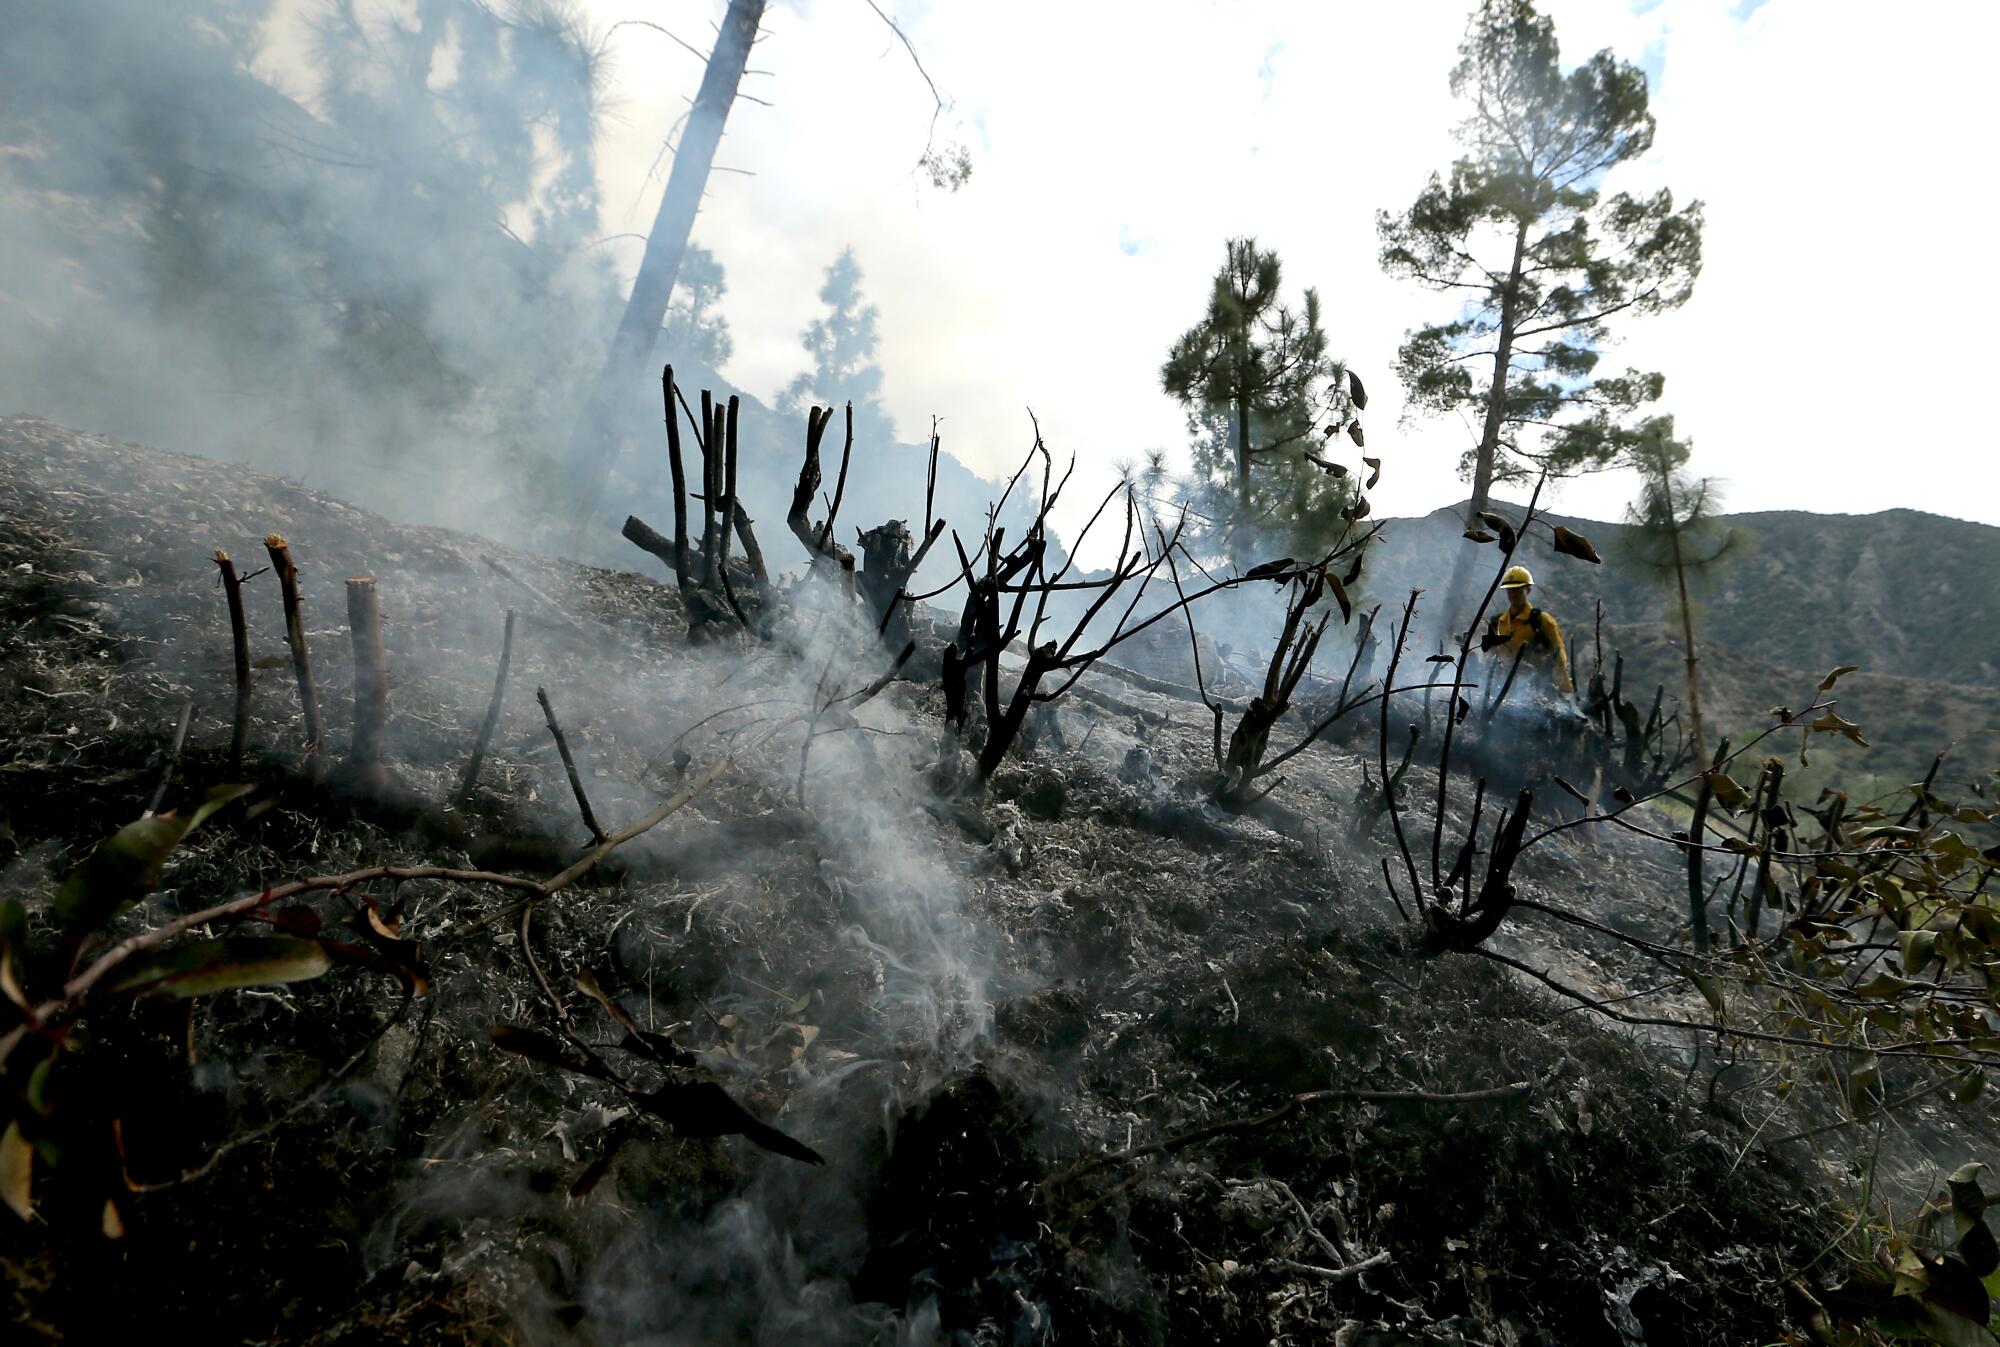 Smoke rises from the smoldering remnants of a prescribed burn.